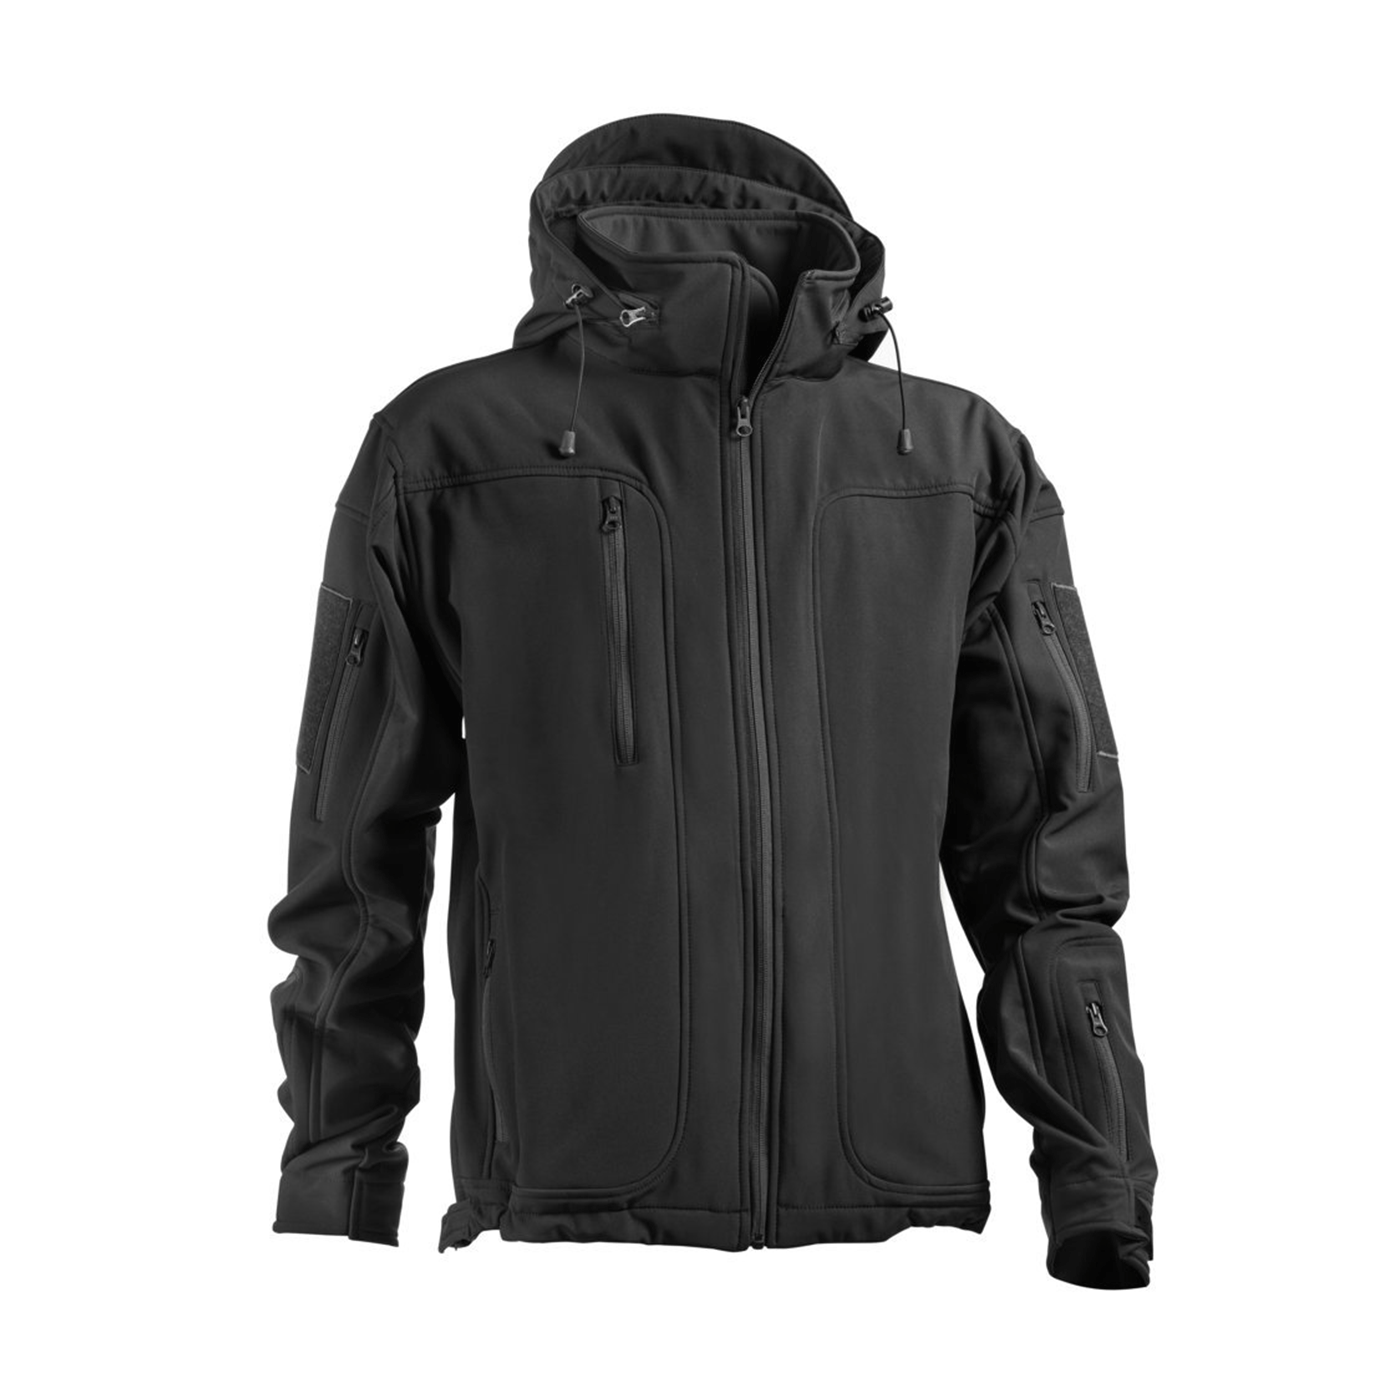 NERG OPENLAND TACTICAL - GIACCA LIGHT SOFTSHELL "DELTA" Nero